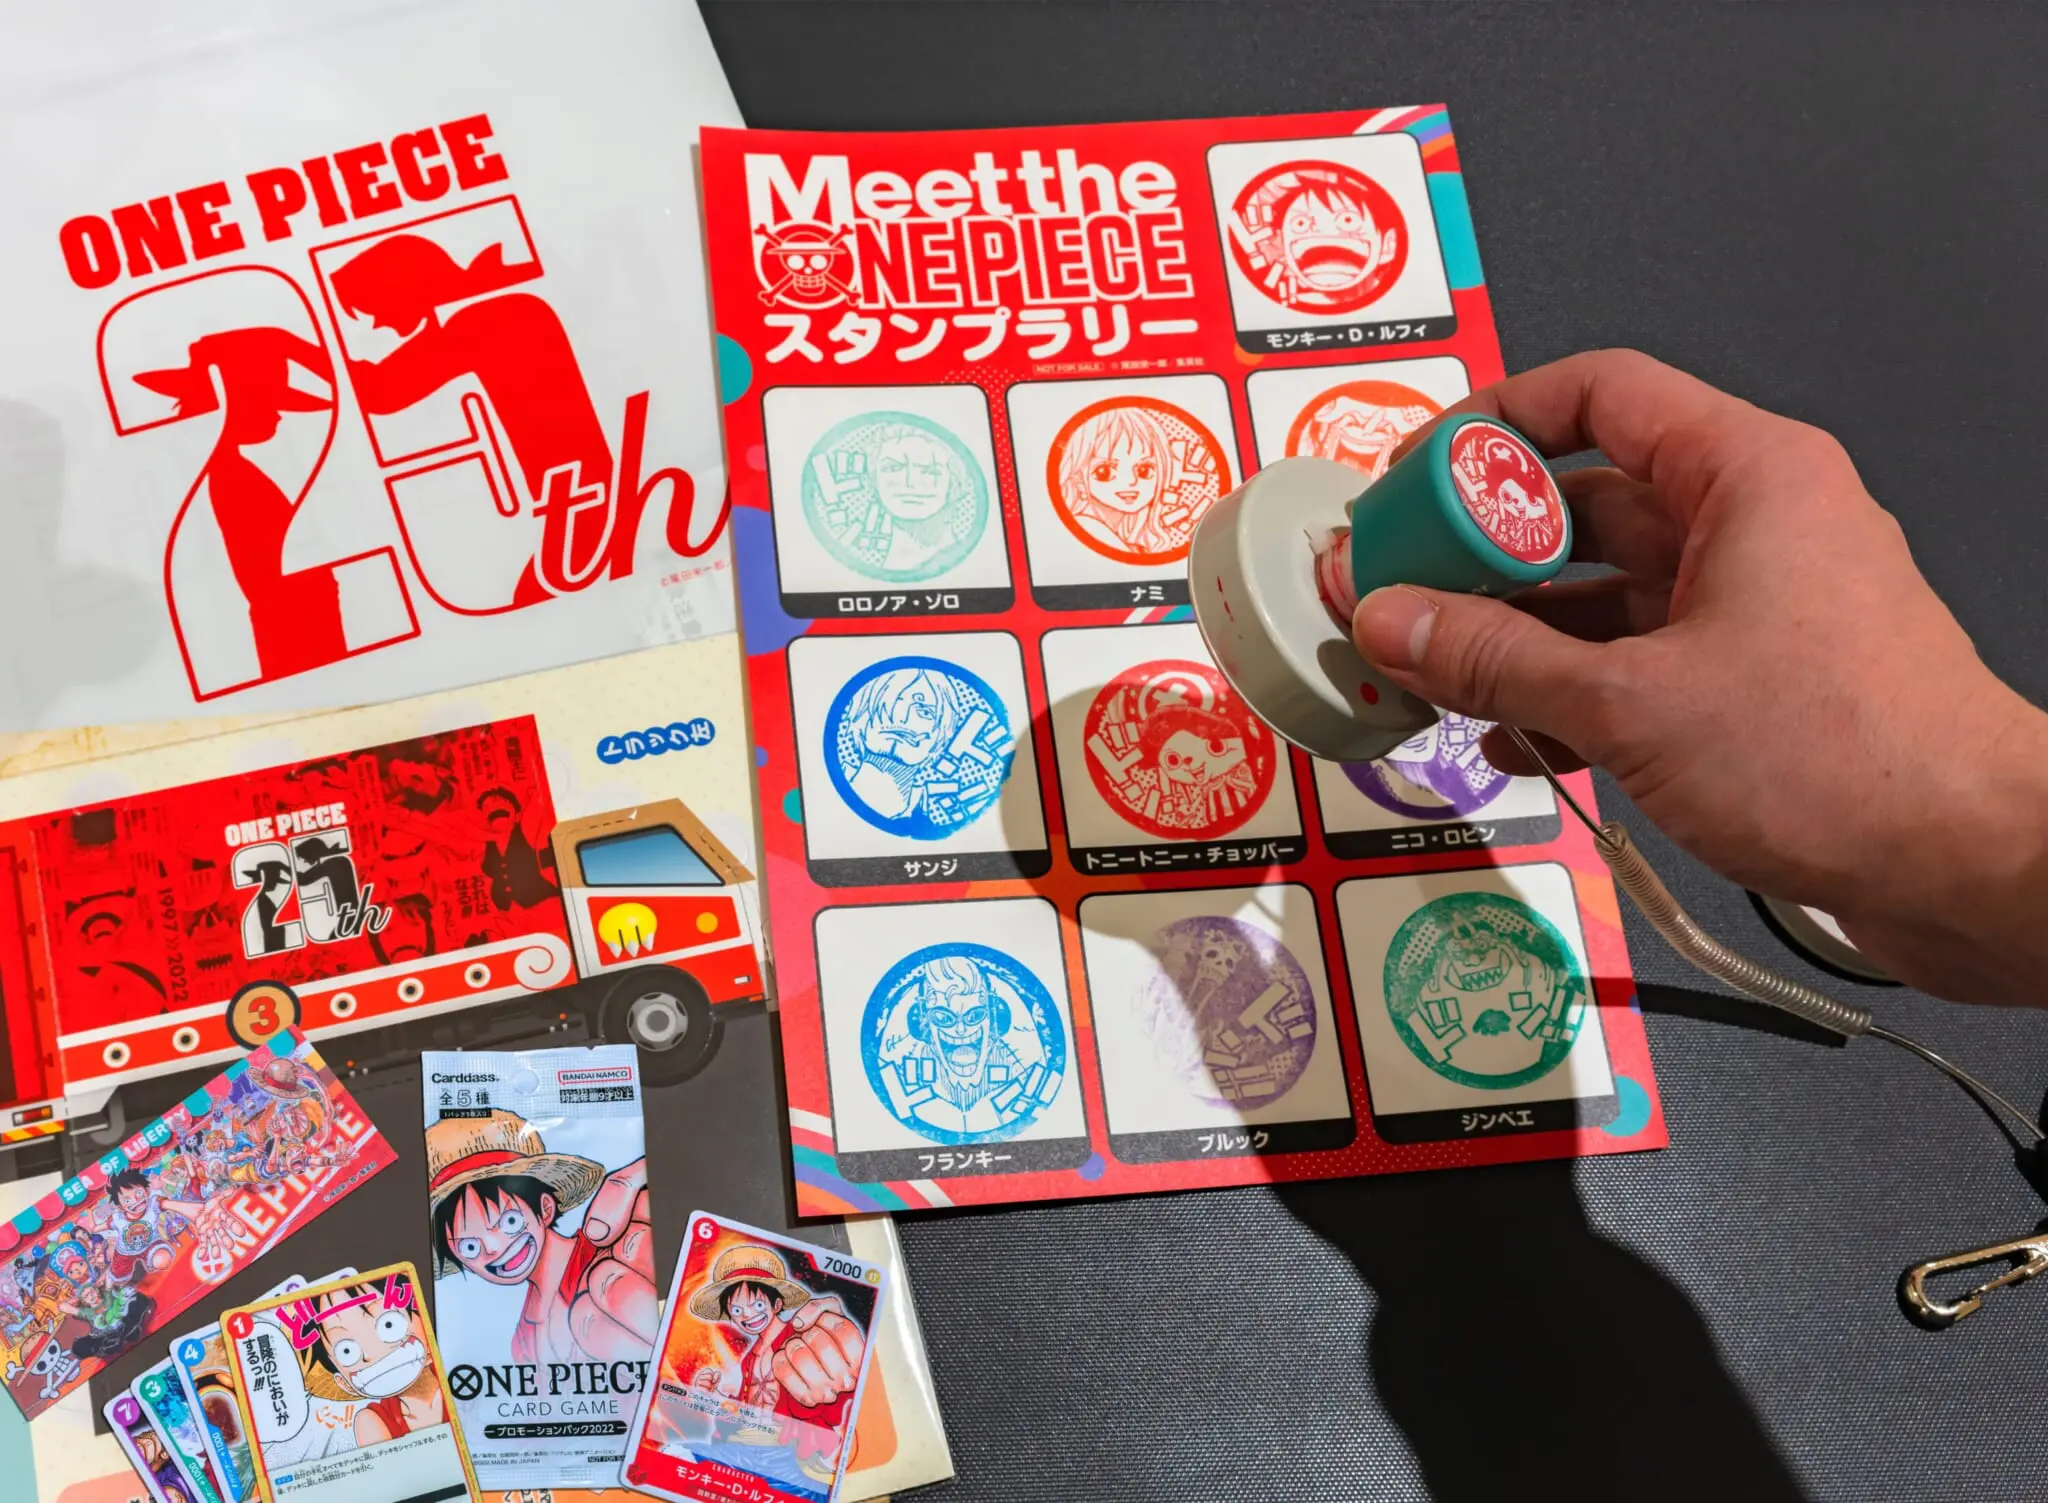 Japan's Stamp Rallies: What They Are and How To Participate